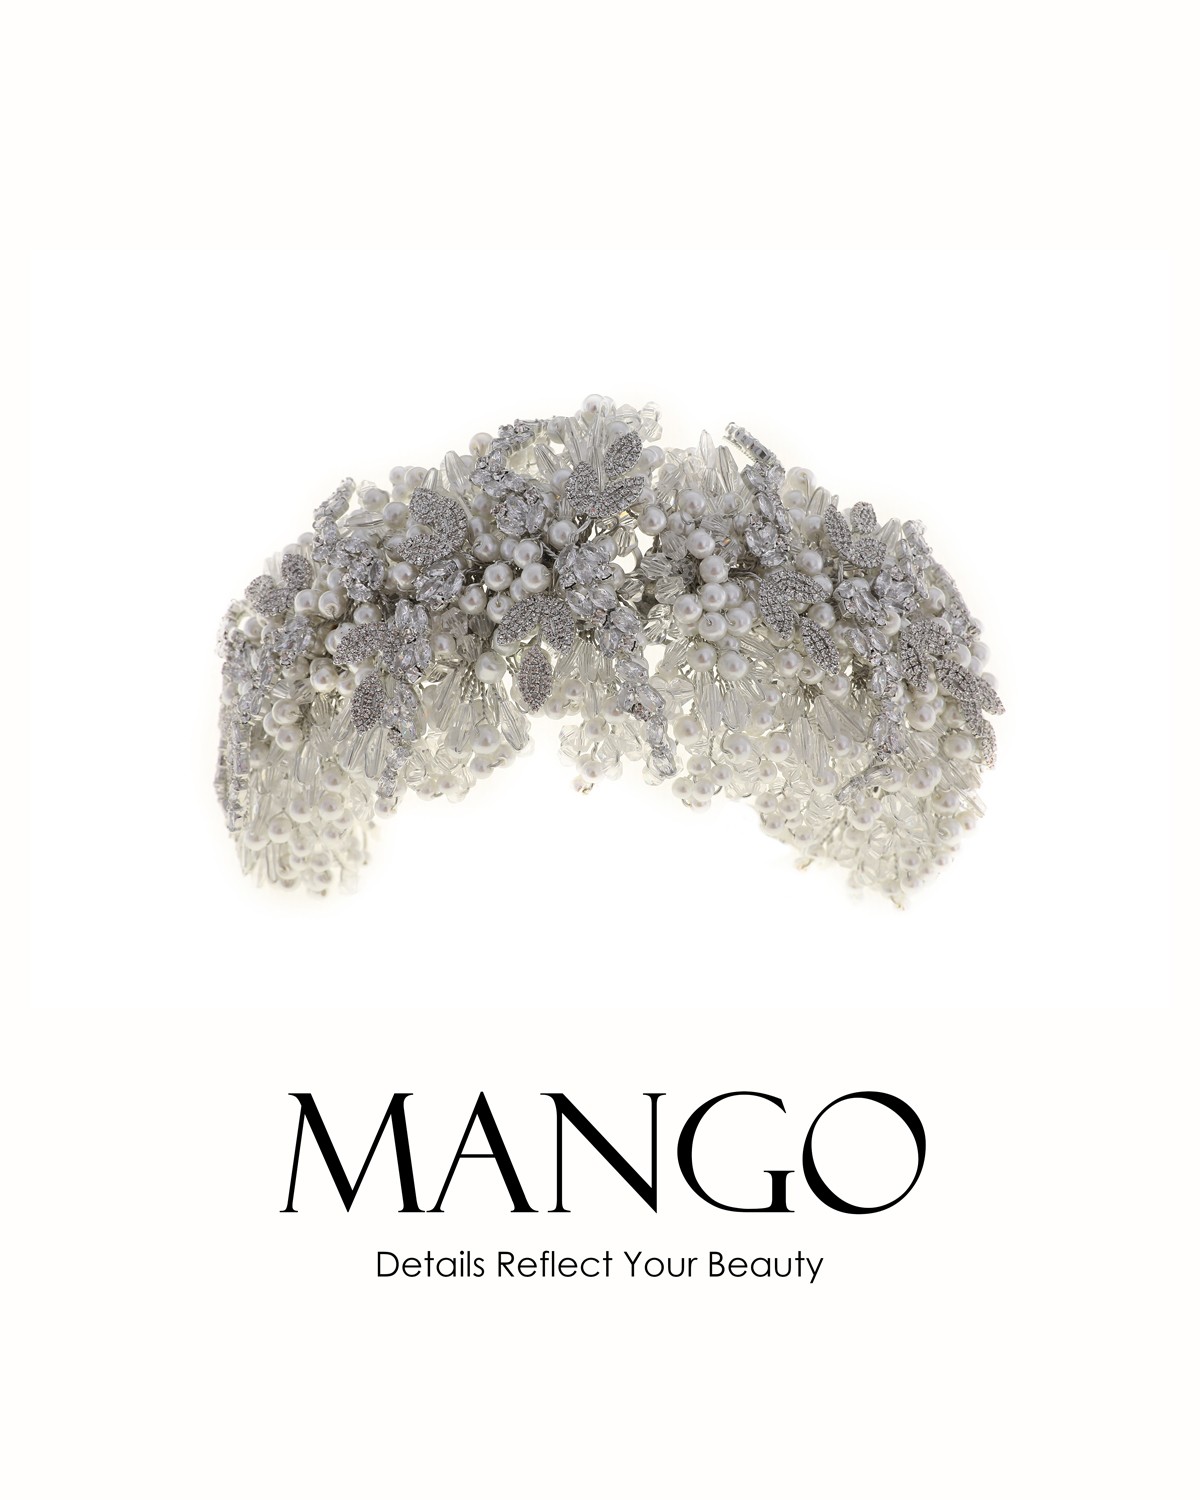 Mango Zircon Stone And Pearl Hair Accessories Buy Now.